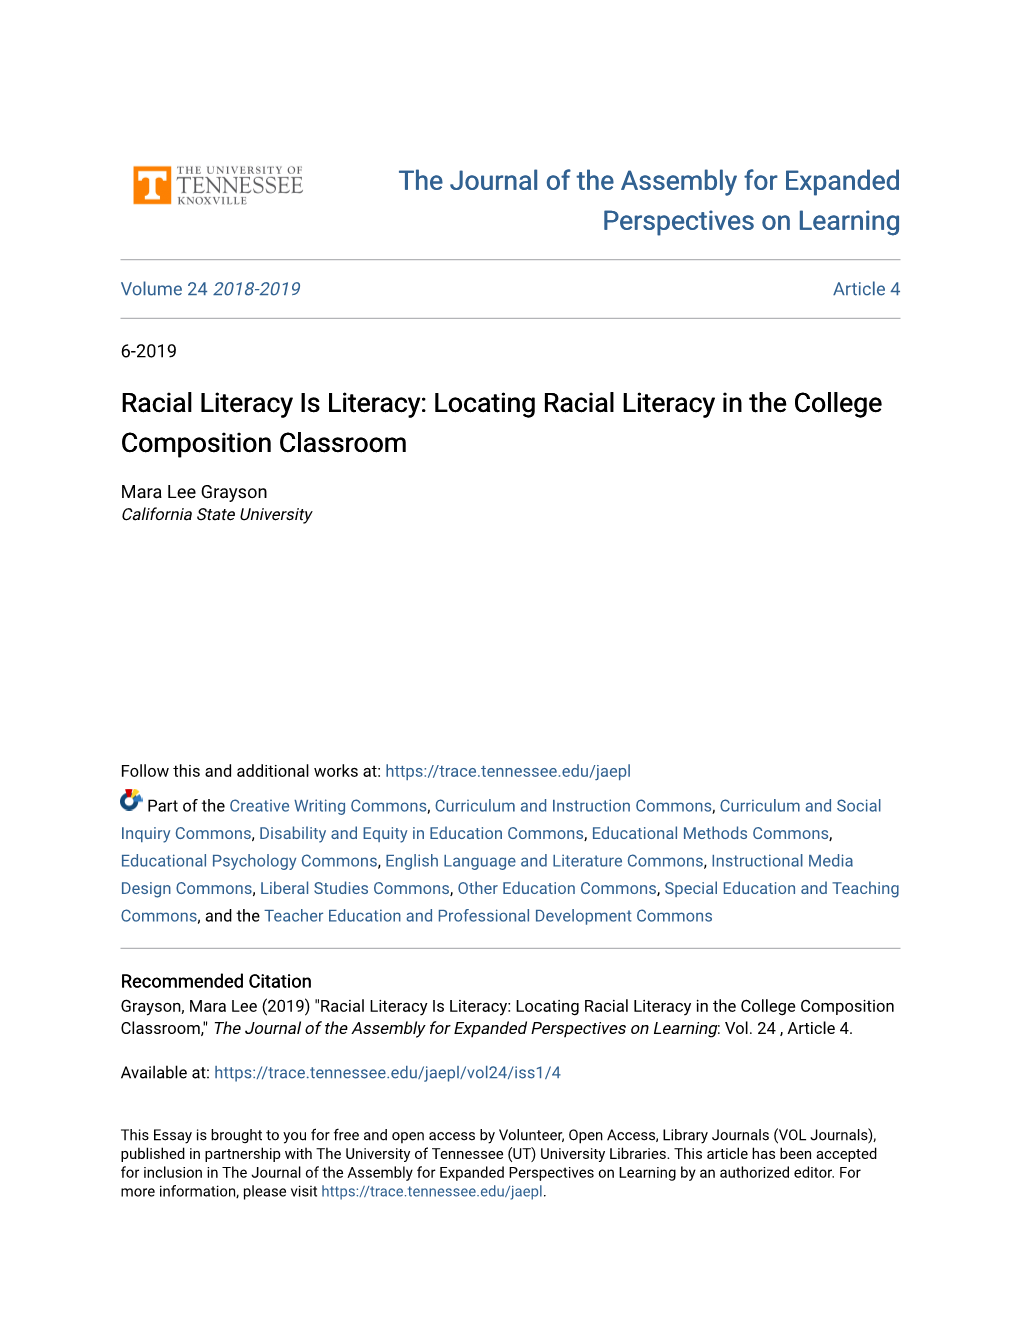 Racial Literacy Is Literacy: Locating Racial Literacy in the College Composition Classroom